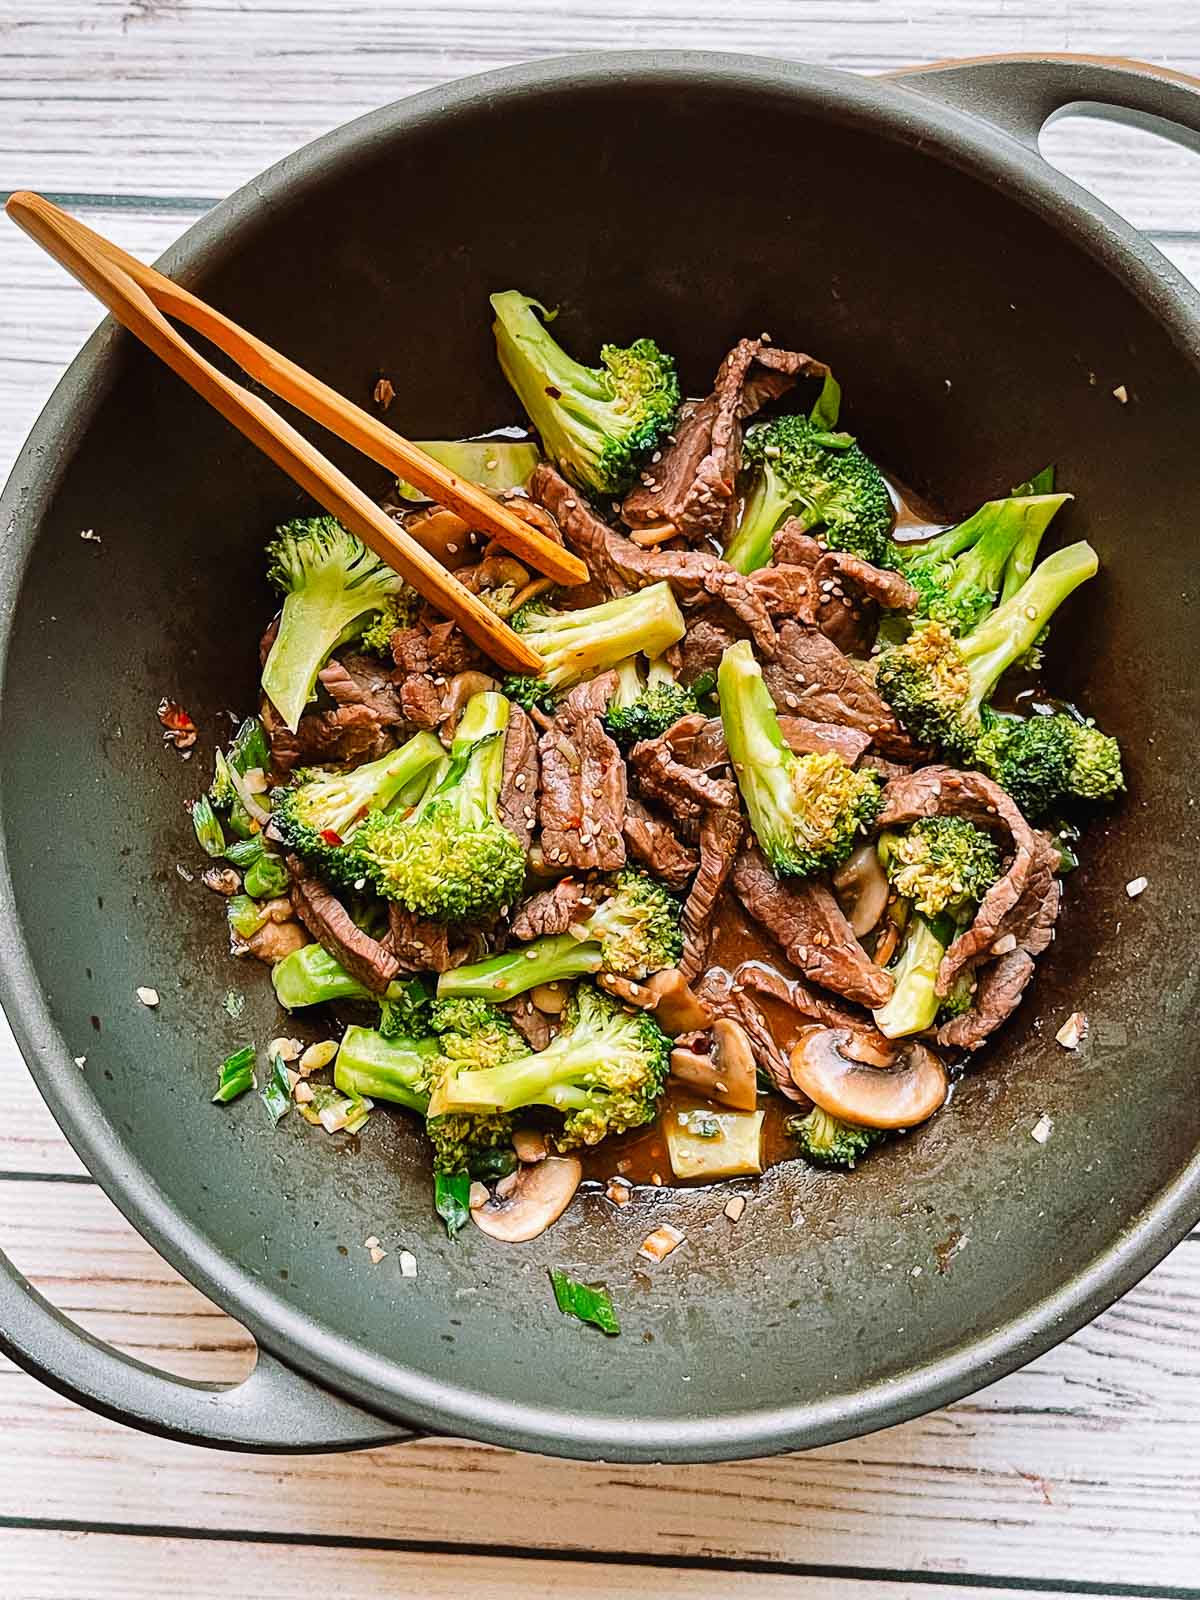 Beef and broccoli stir fry in a large wok with a pair of wooden tongs.